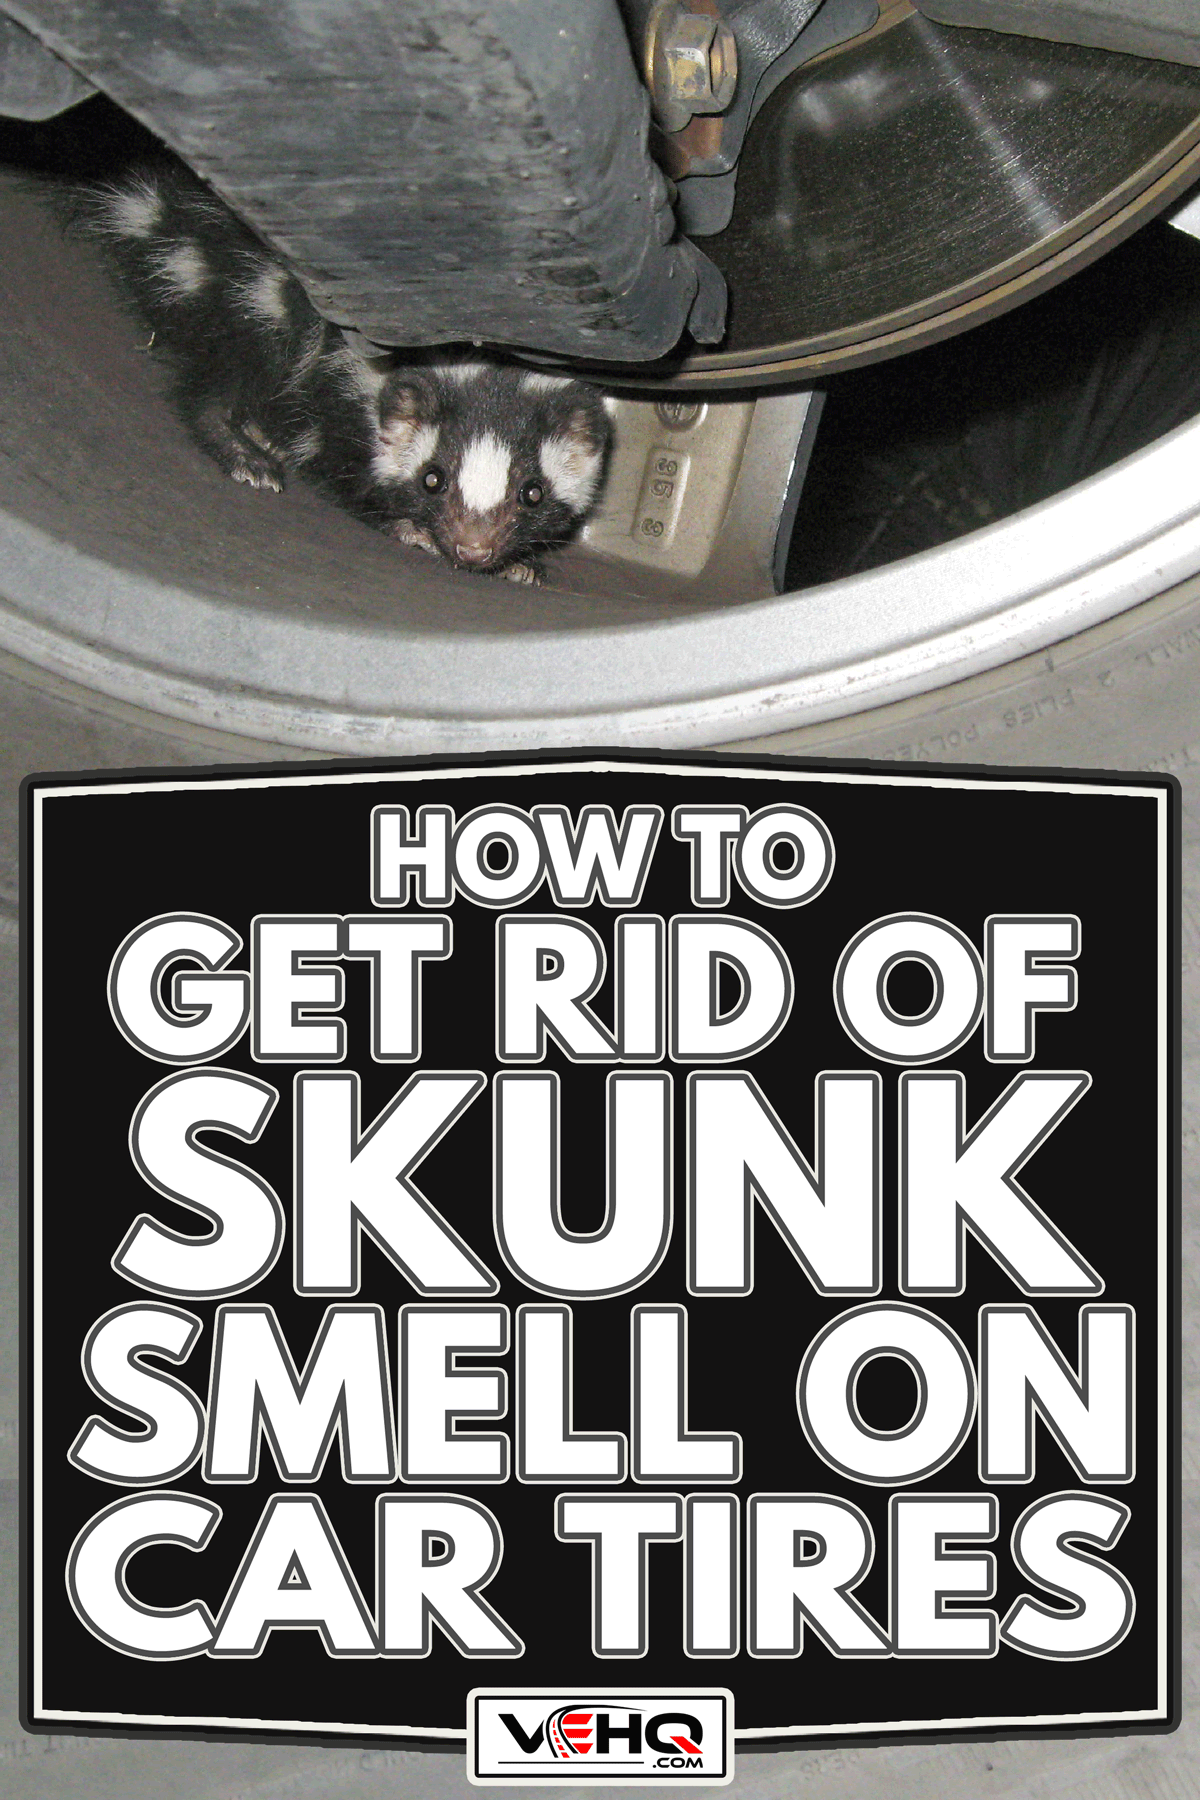 Baby Western spotted skunk hiding in an automobile wheel, How To Get Rid Of Skunk Smell On Car Tires